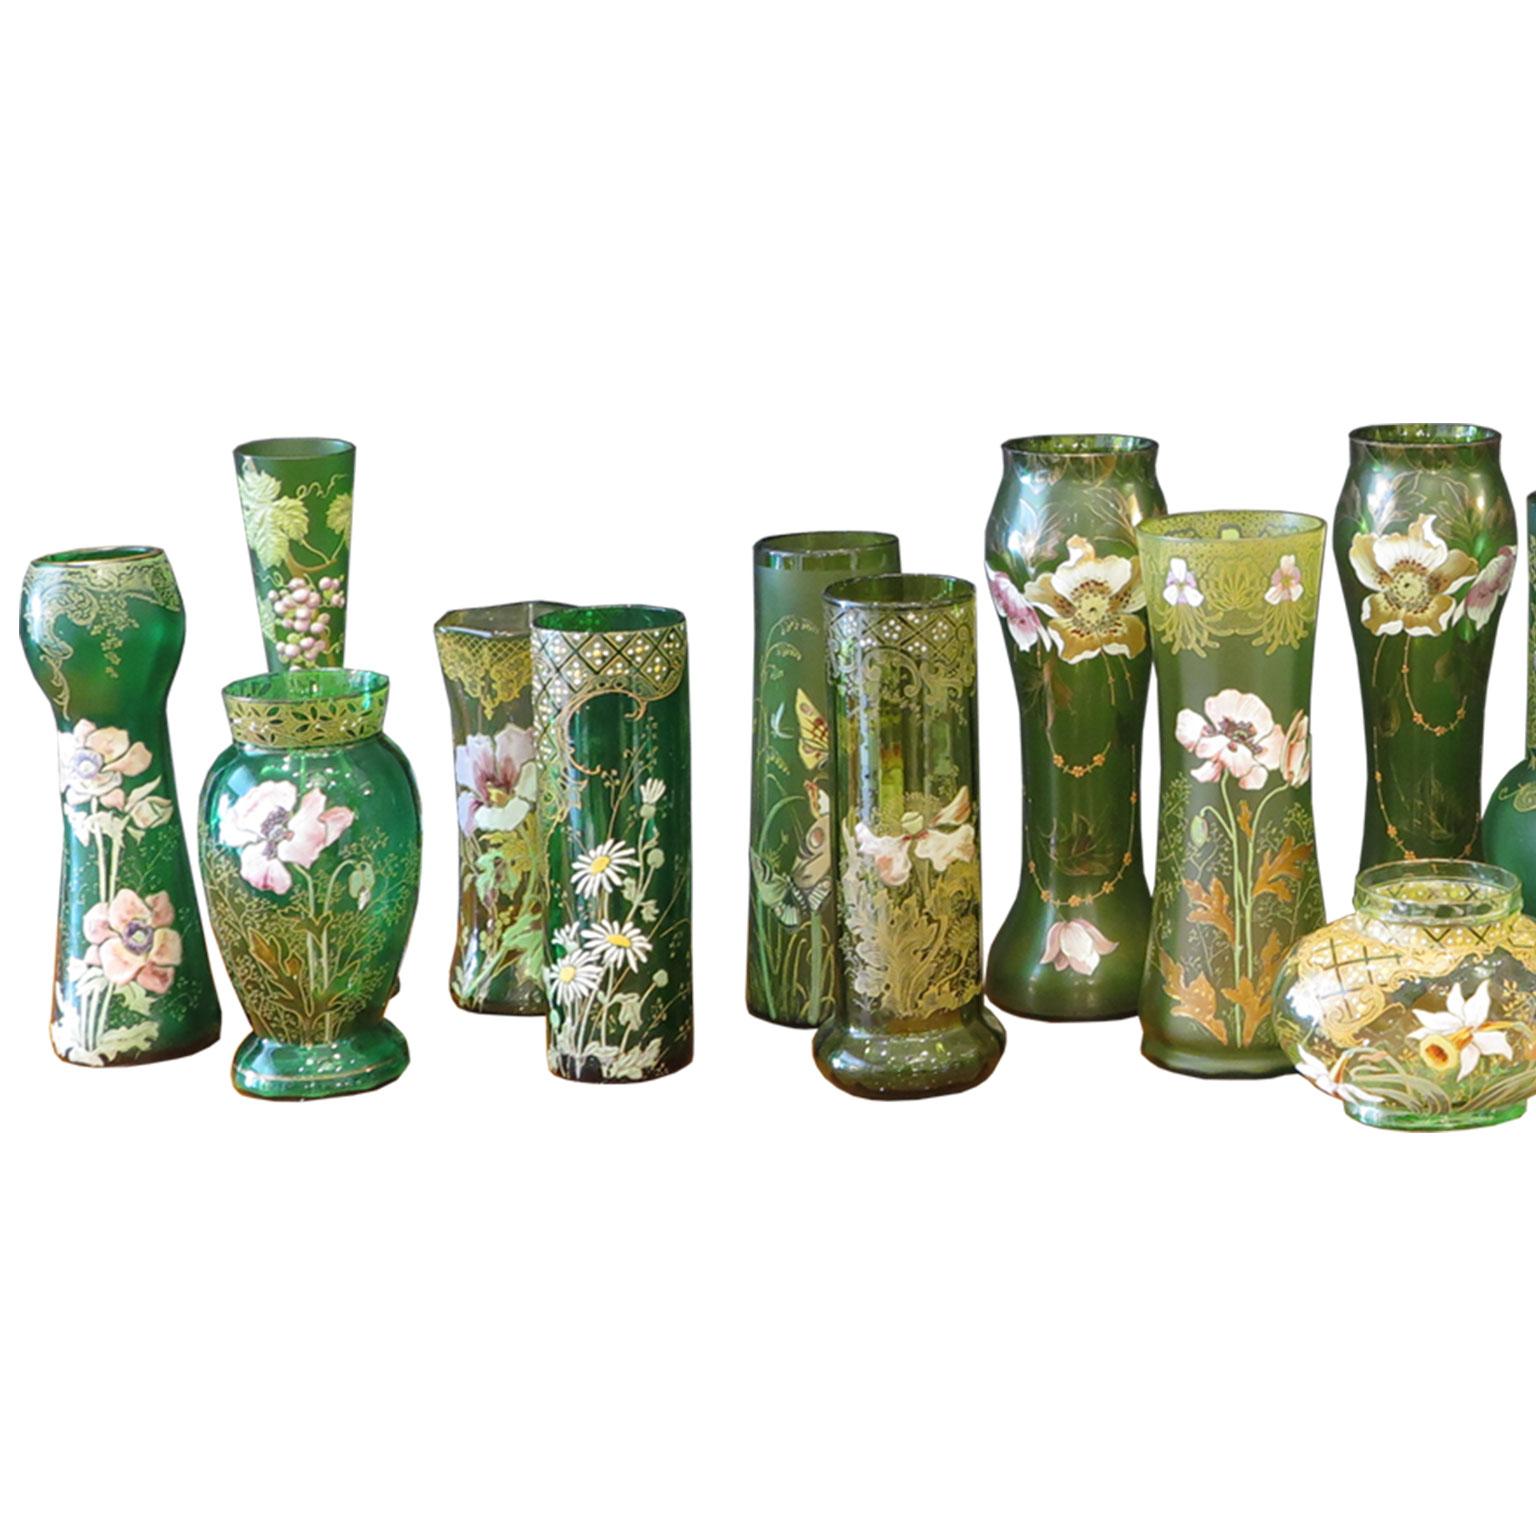 Collection of 18 glass vases in different green tones with polychrome enamel decor in floral motifs. Assortment of different sizes, green tones, and florals.